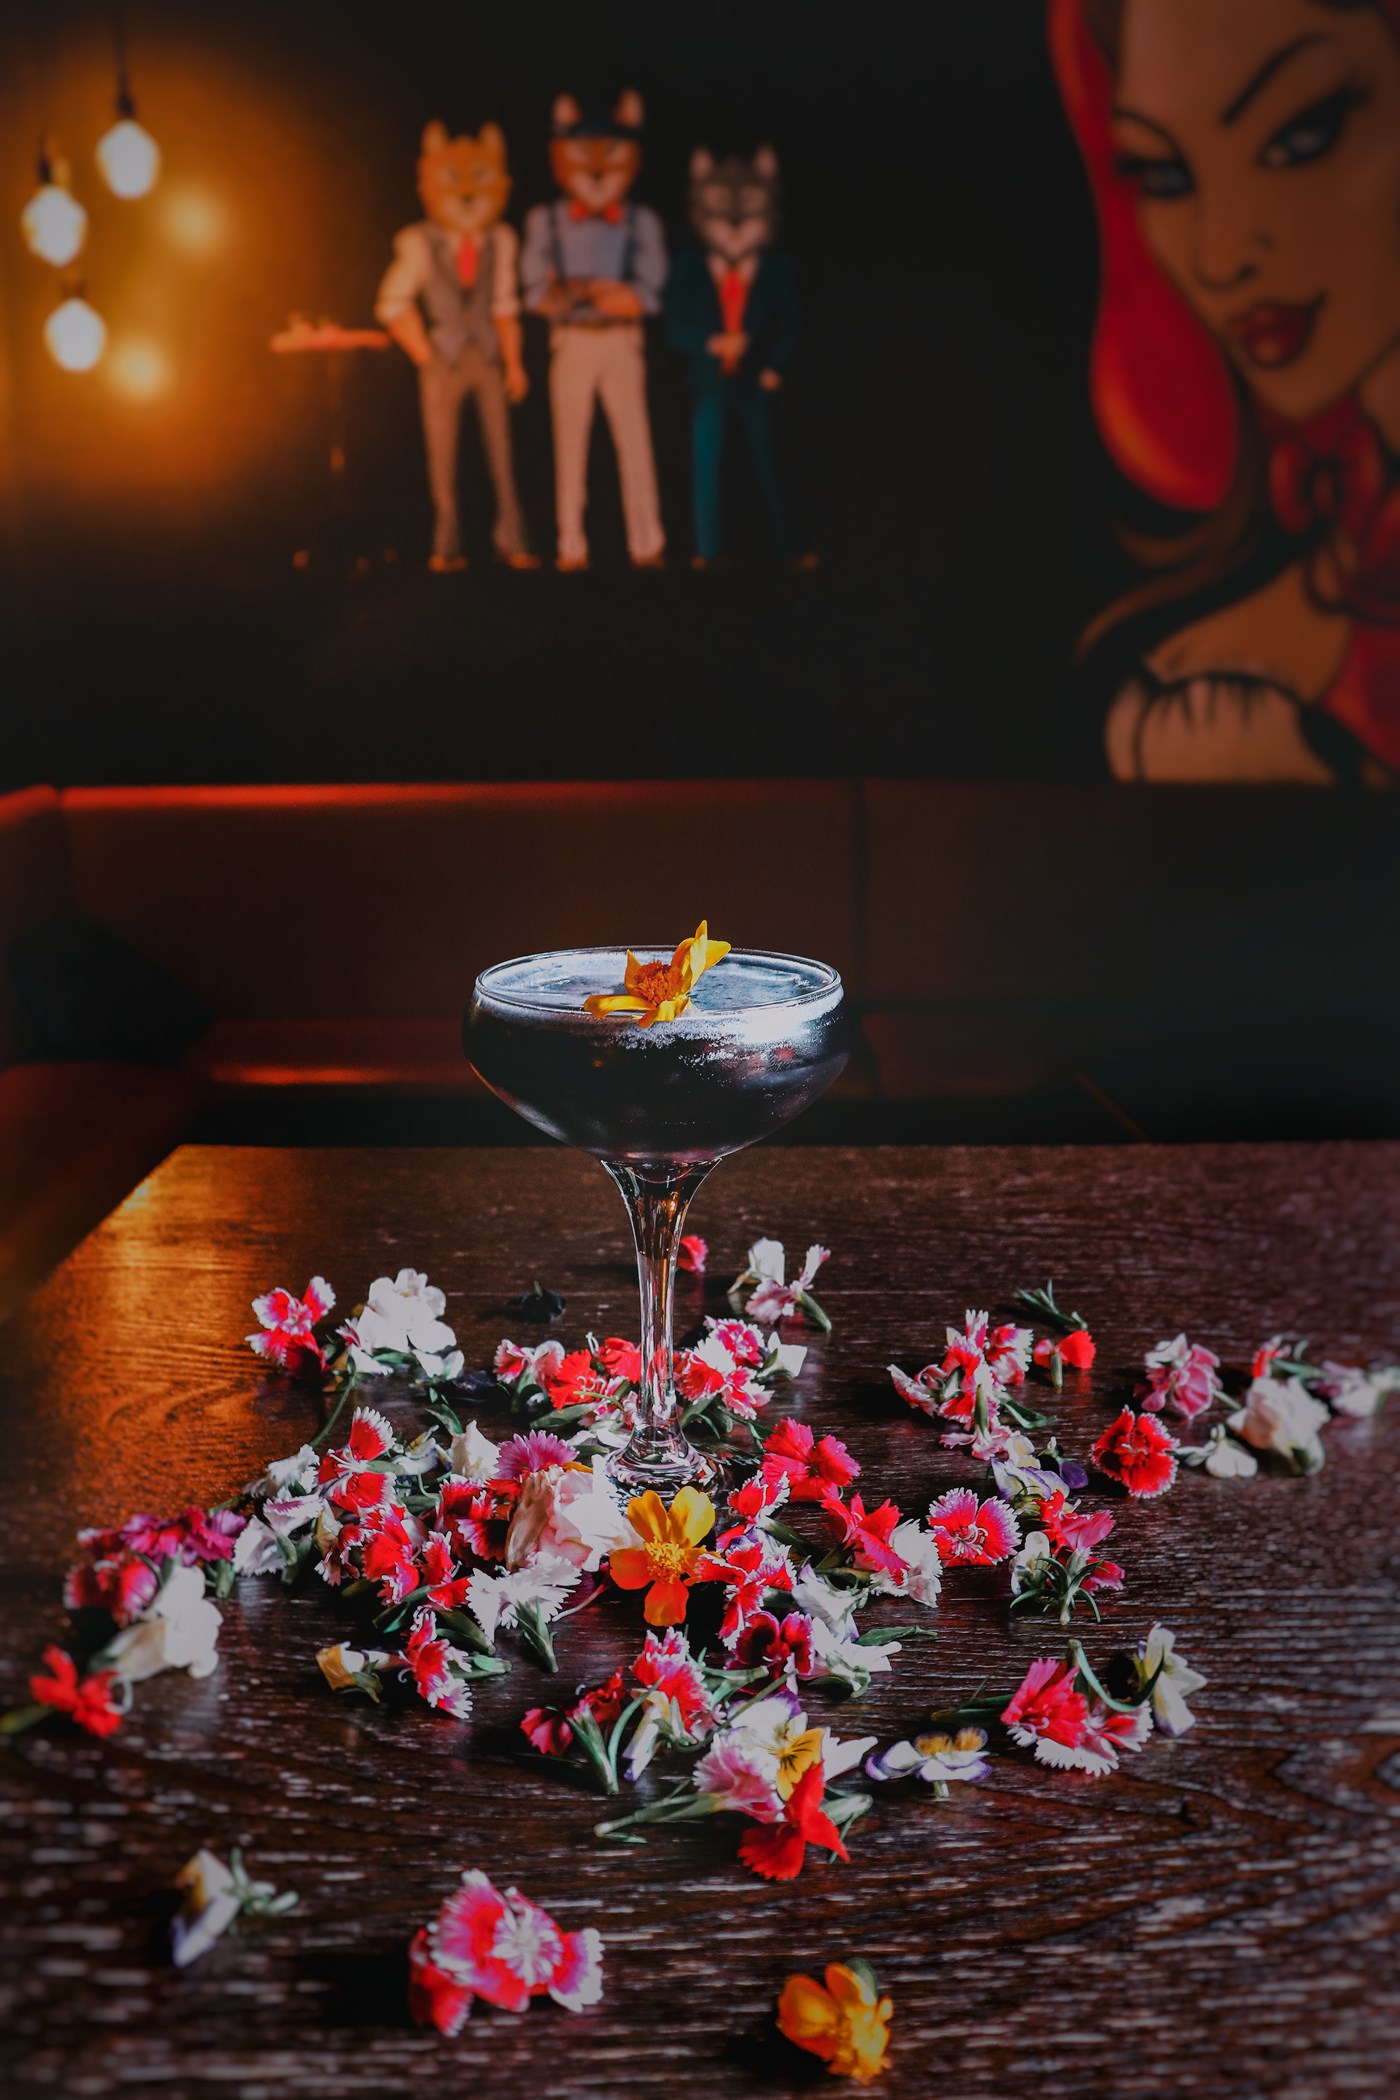 A dark cocktail sits on a brown table, surrounded by scatted garnish flowers.